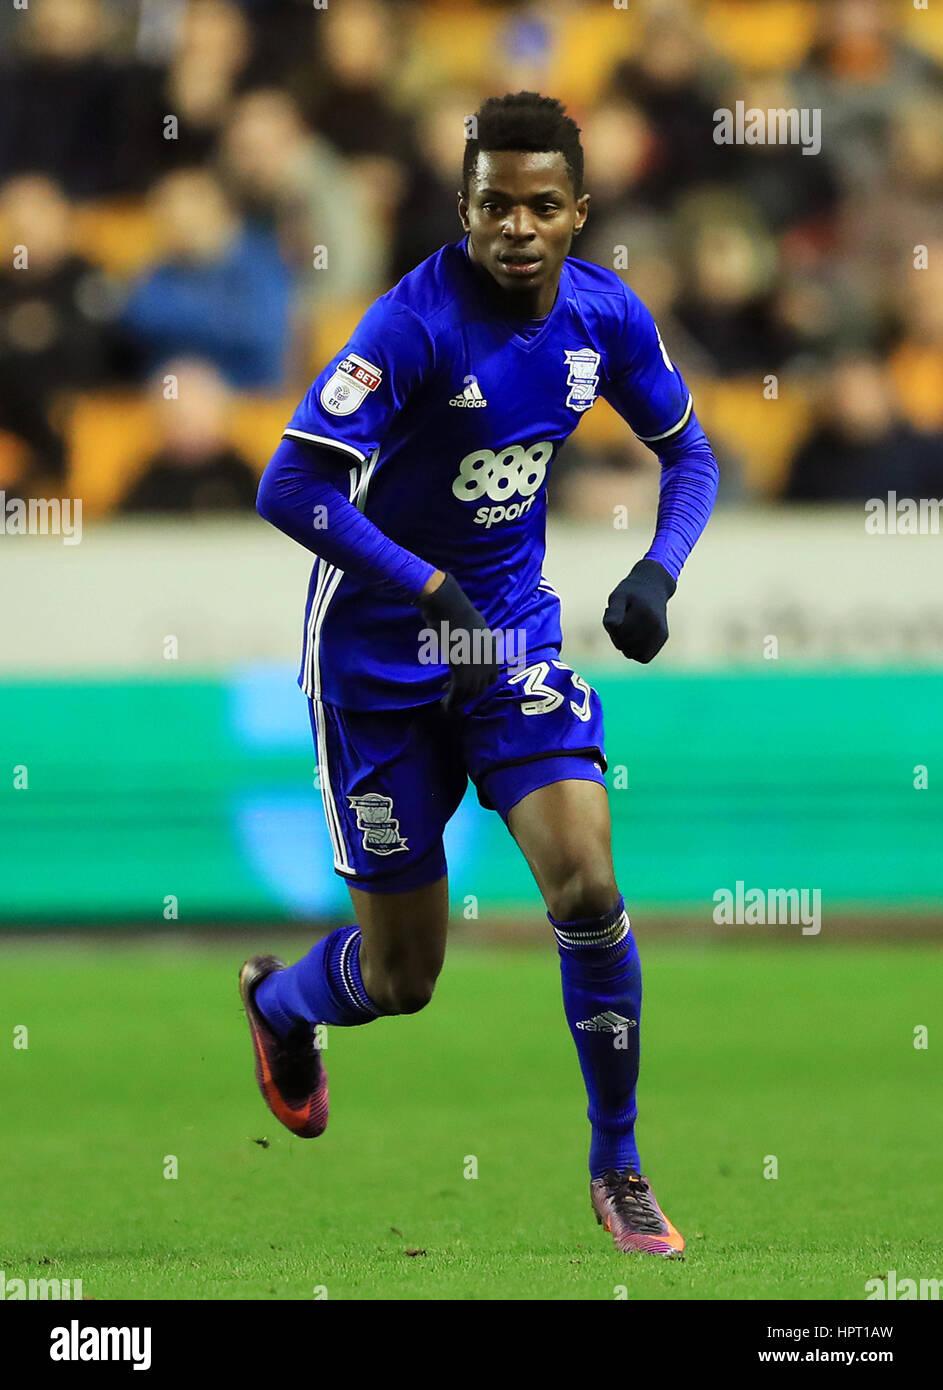 Birmingham City's Cheick Keita during the Sky Bet Championship match at Molineux, Wolverhampton. PRESS ASSOCIATION Photo. Picture date: Friday February 24, 2017. See PA story SOCCER Wolves. Photo credit should read: Tim Goode/PA Wire. RESTRICTIONS: No use with unauthorised audio, video, data, fixture lists, club/league logos or 'live' services. Online in-match use limited to 75 images, no video emulation. No use in betting, games or single club/league/player publications. Stock Photo